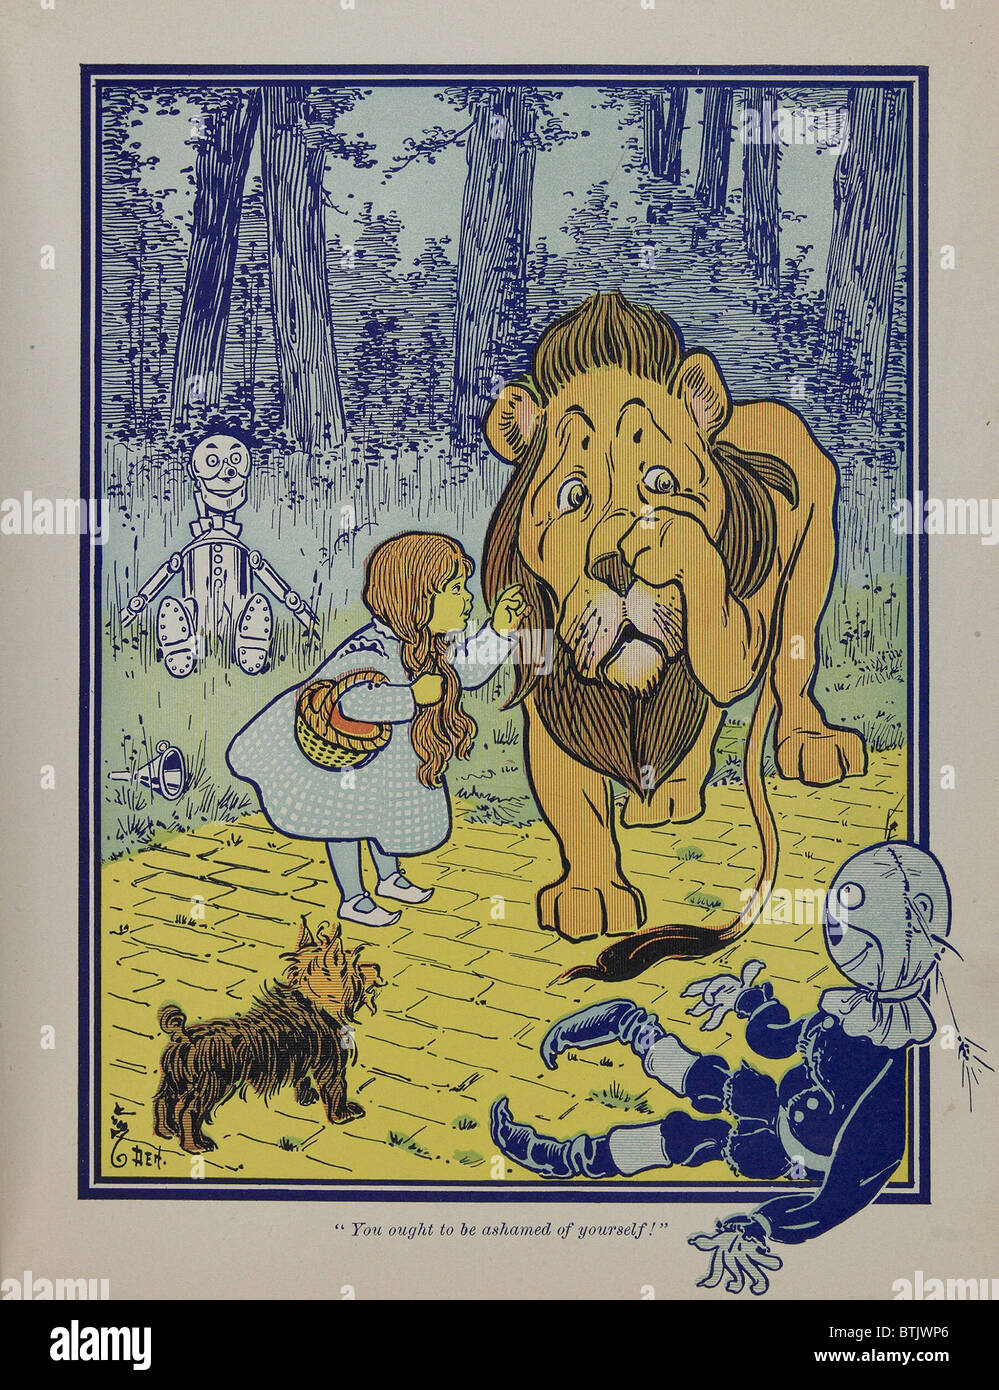 'Wonderful Wizard of Oz' main characters, created by Frank Lyman Baum in 1900.  Dorothy speaks to the Cowardly Lion. Stock Photo